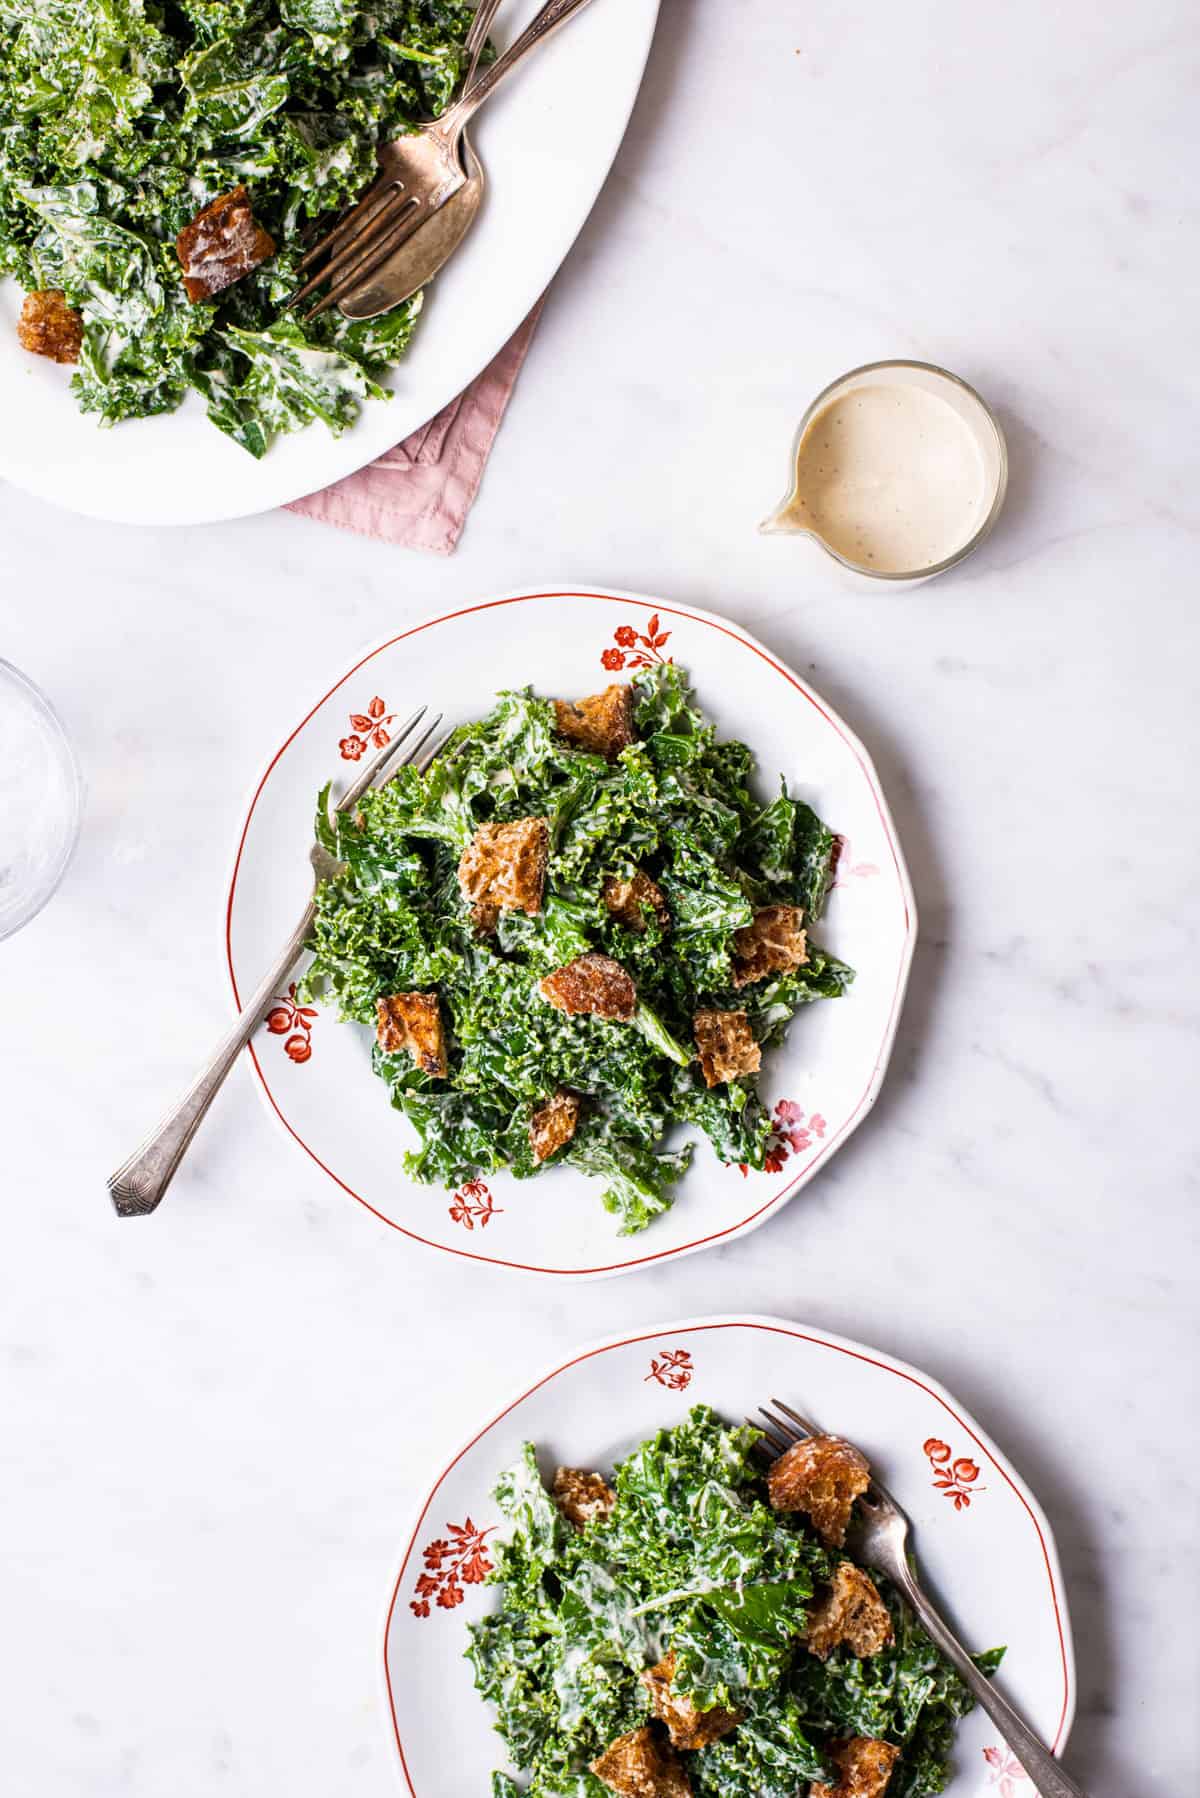 Vegan kale caesar salad with homemade croutons on white plates.